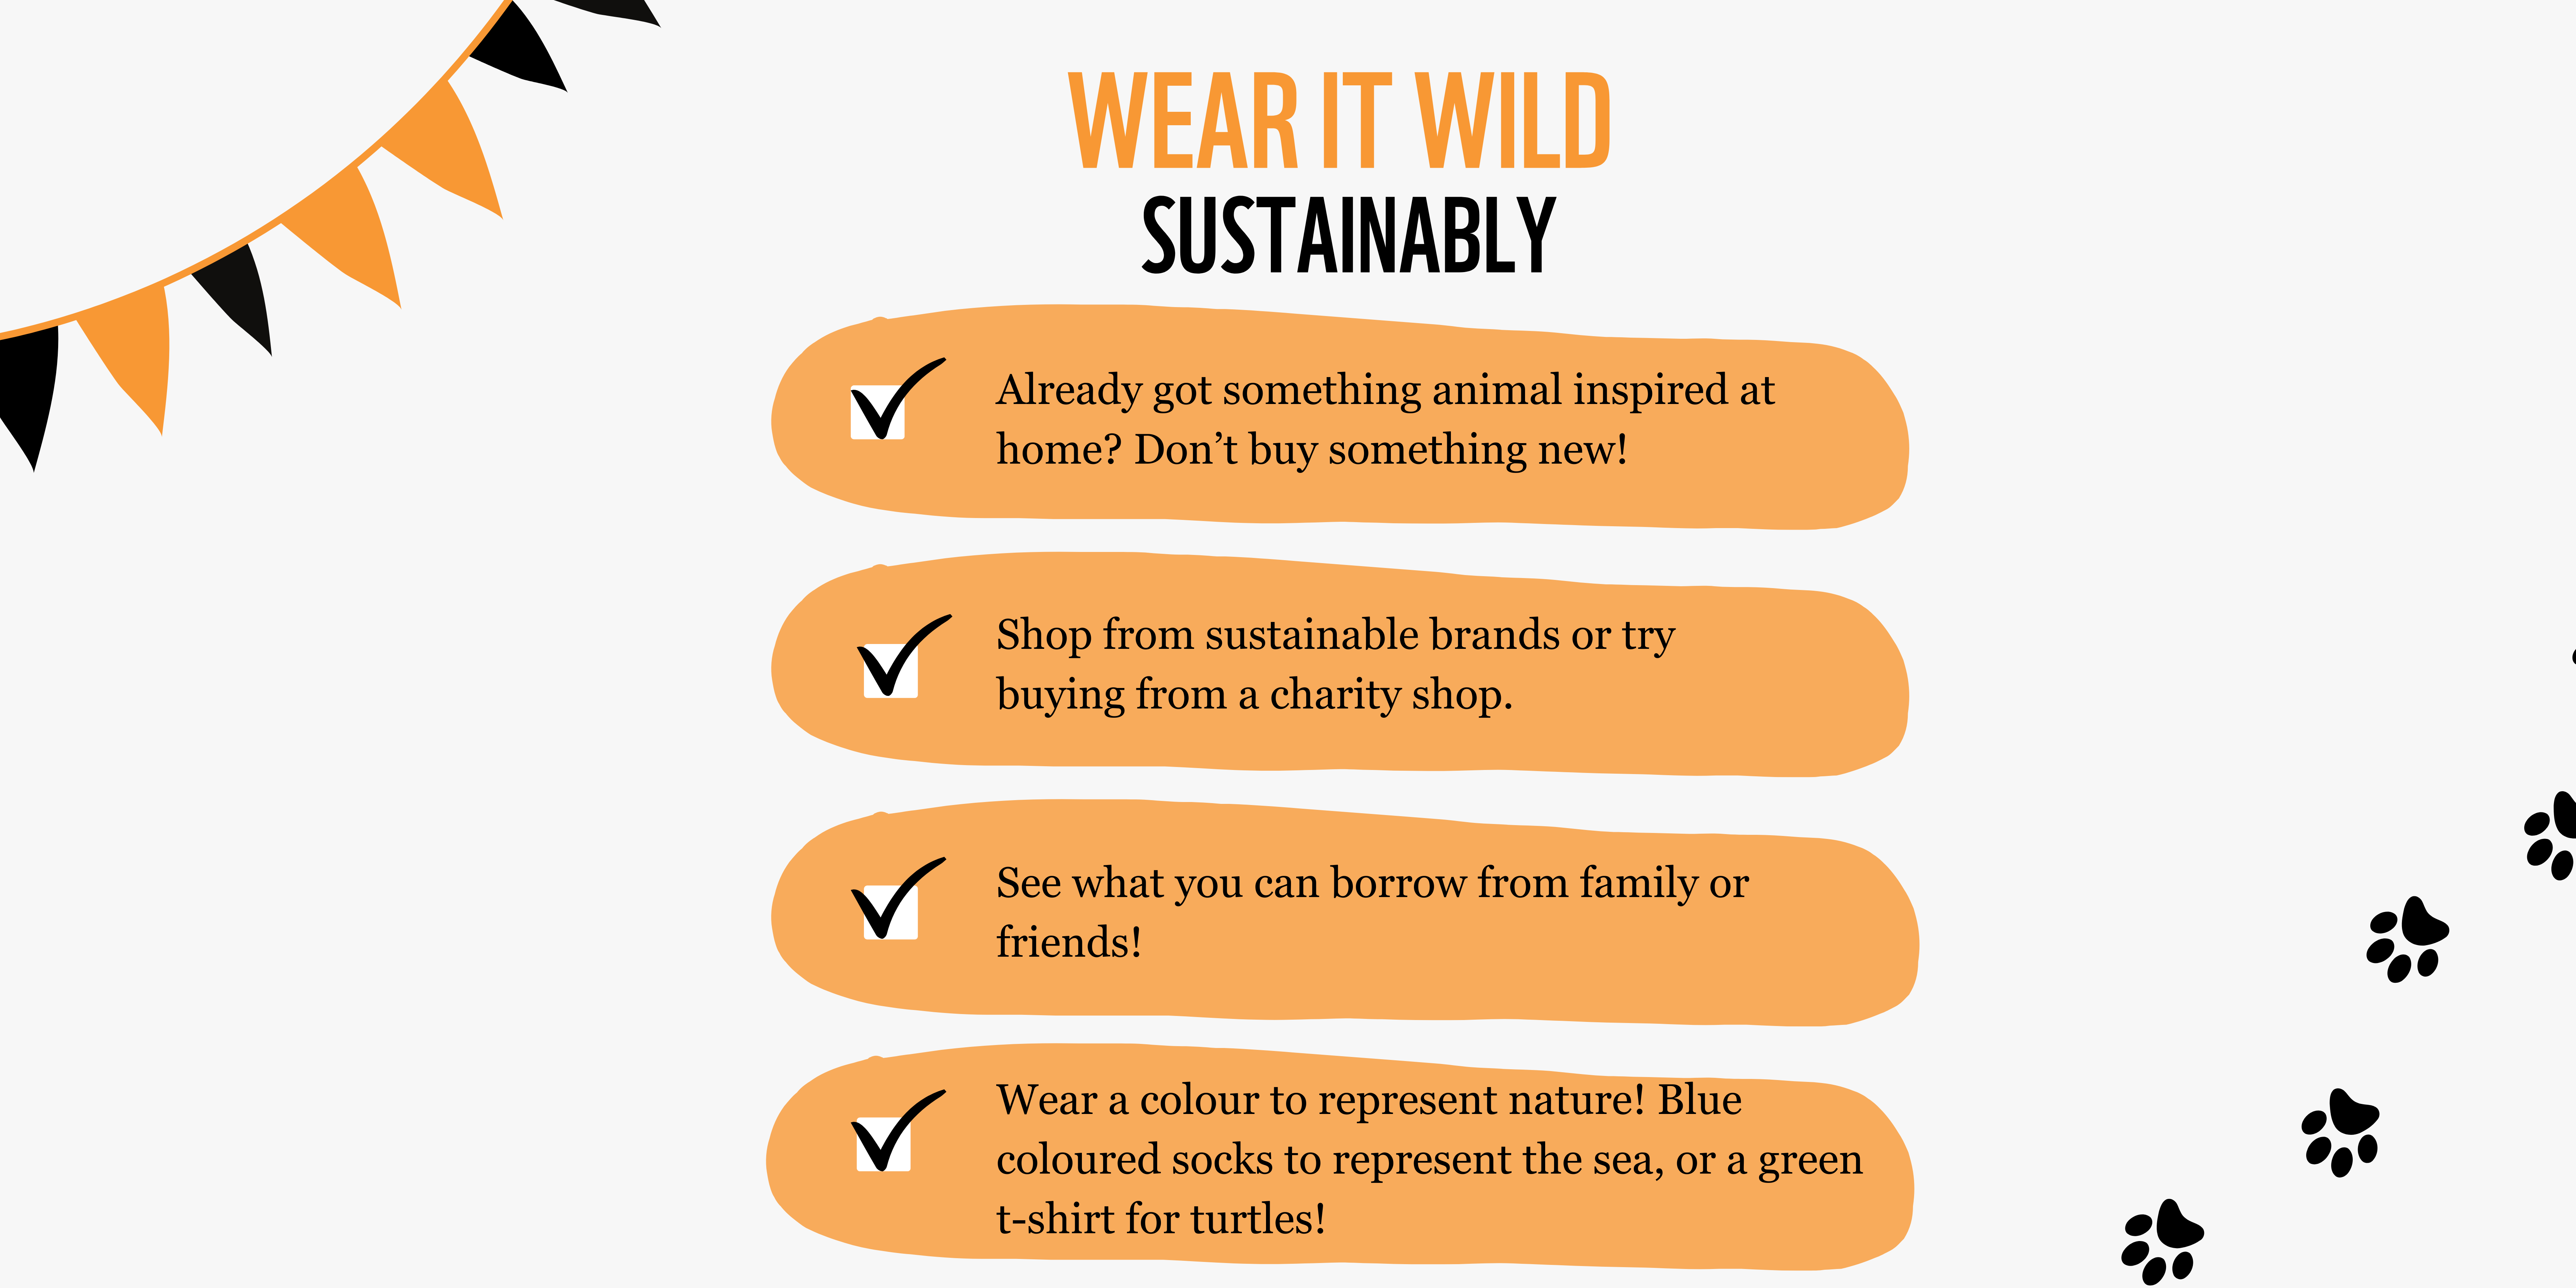 Wear it Wild sustainably tips - don't buy new, charity shop, borrow from friends, wear a colour to represent nature